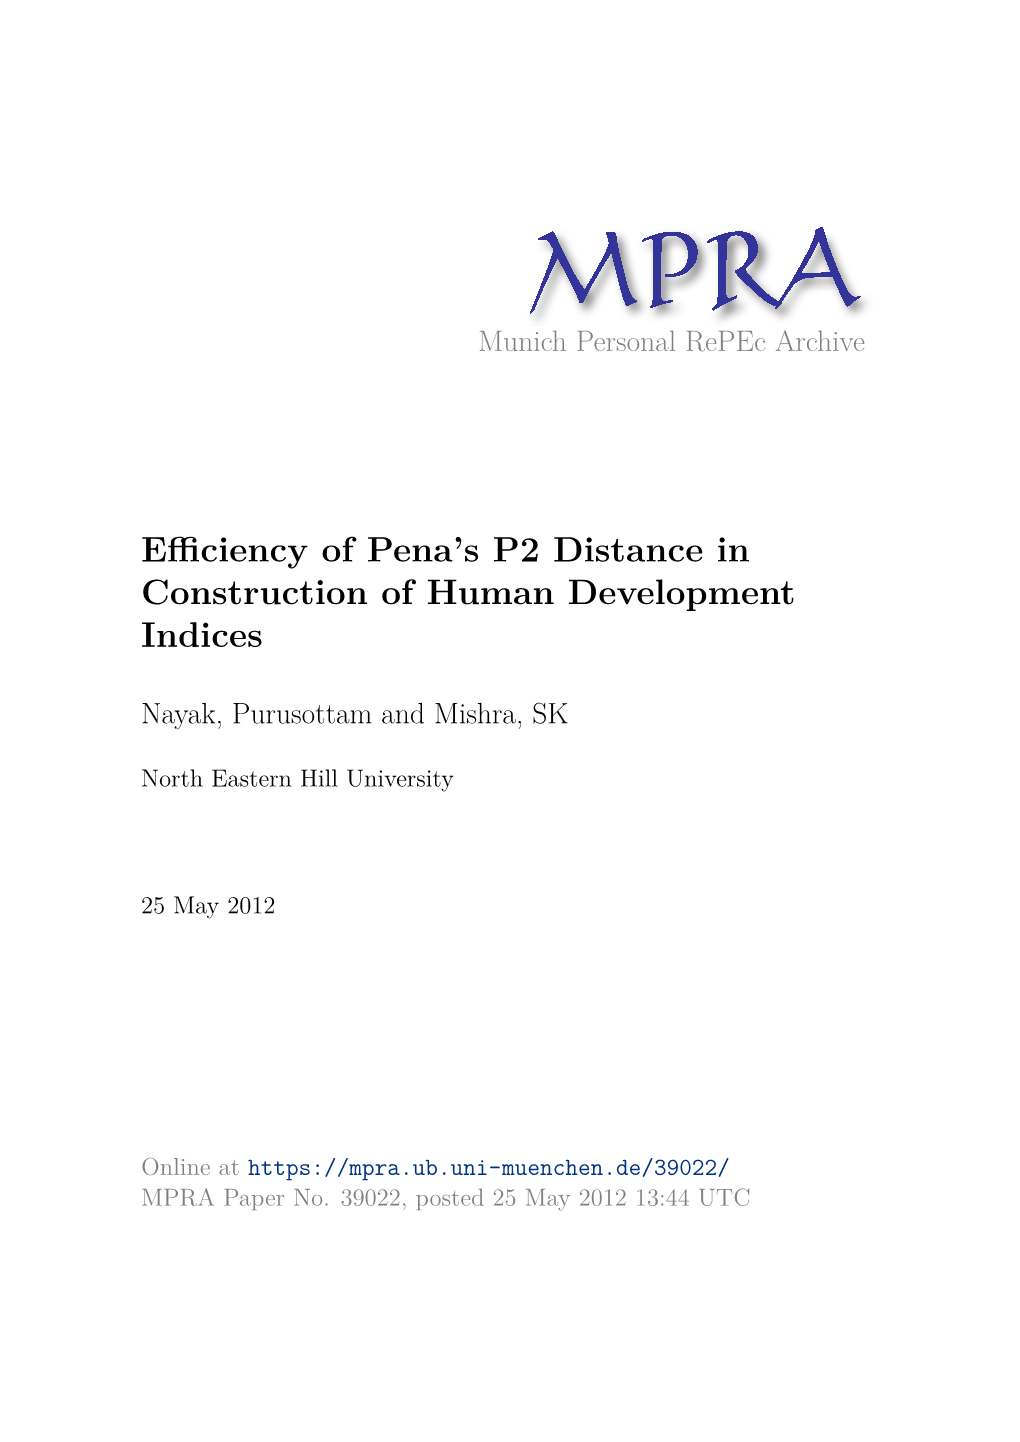 Efficiency of Pena's P2 Distance in Construction of Human Development Indices